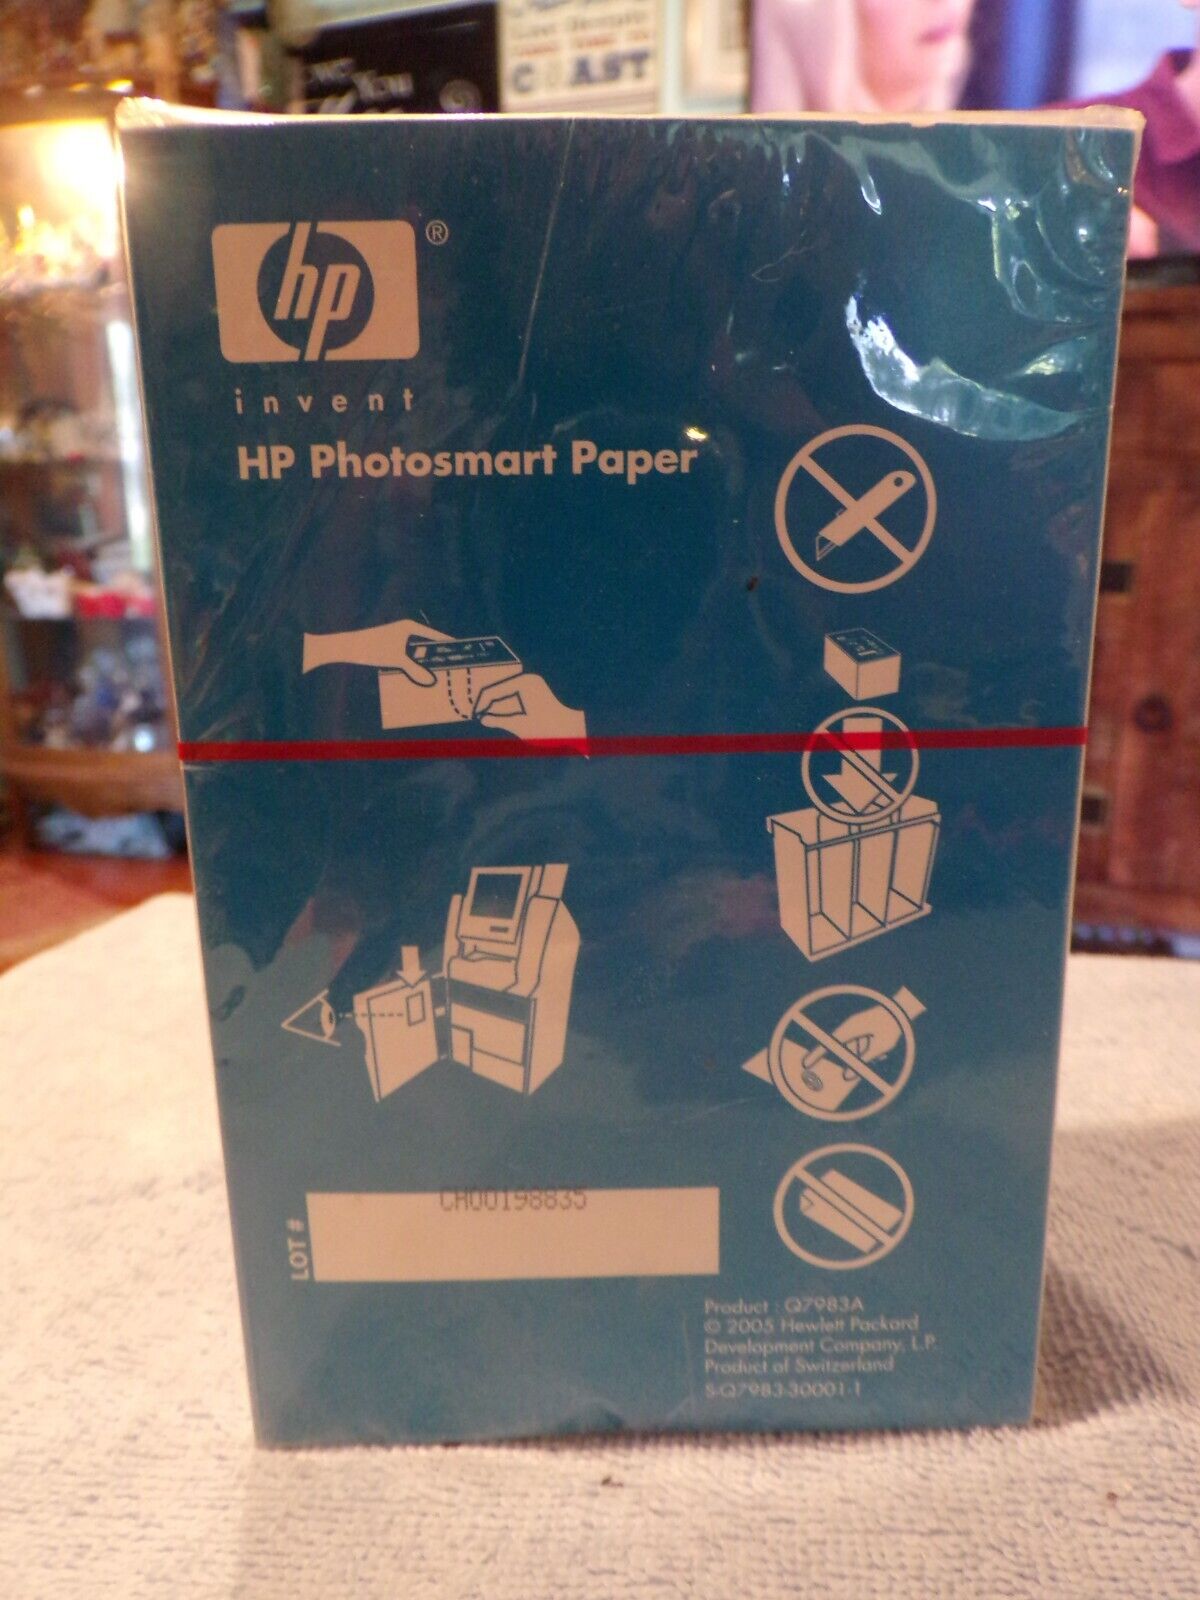 NEW Sealed Package HP PHOTOSMART PAPER 4 x 6 Q7983A 100 sheets GG